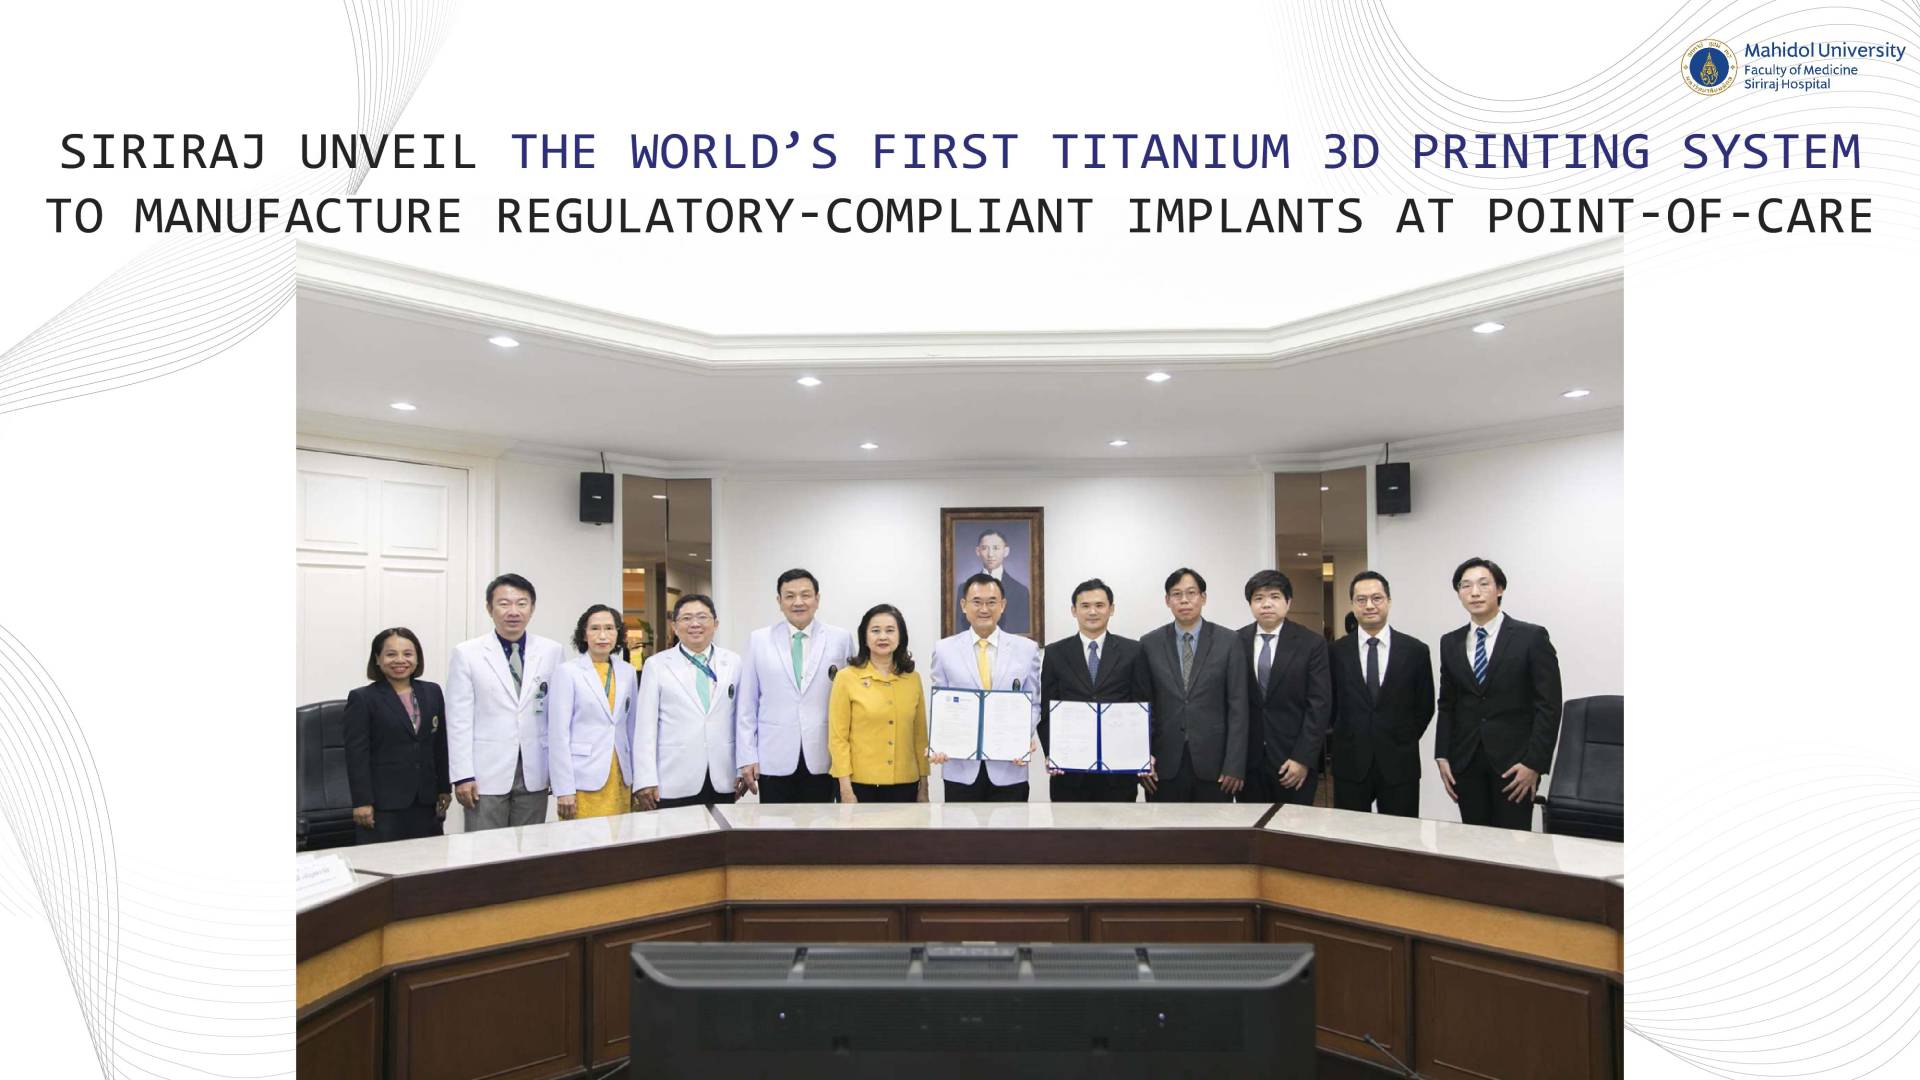 Siriraj Unveil the World’s First Titanium 3D Printing System To Manufacture Regulatory-Compliant Implants at Point-of-Care